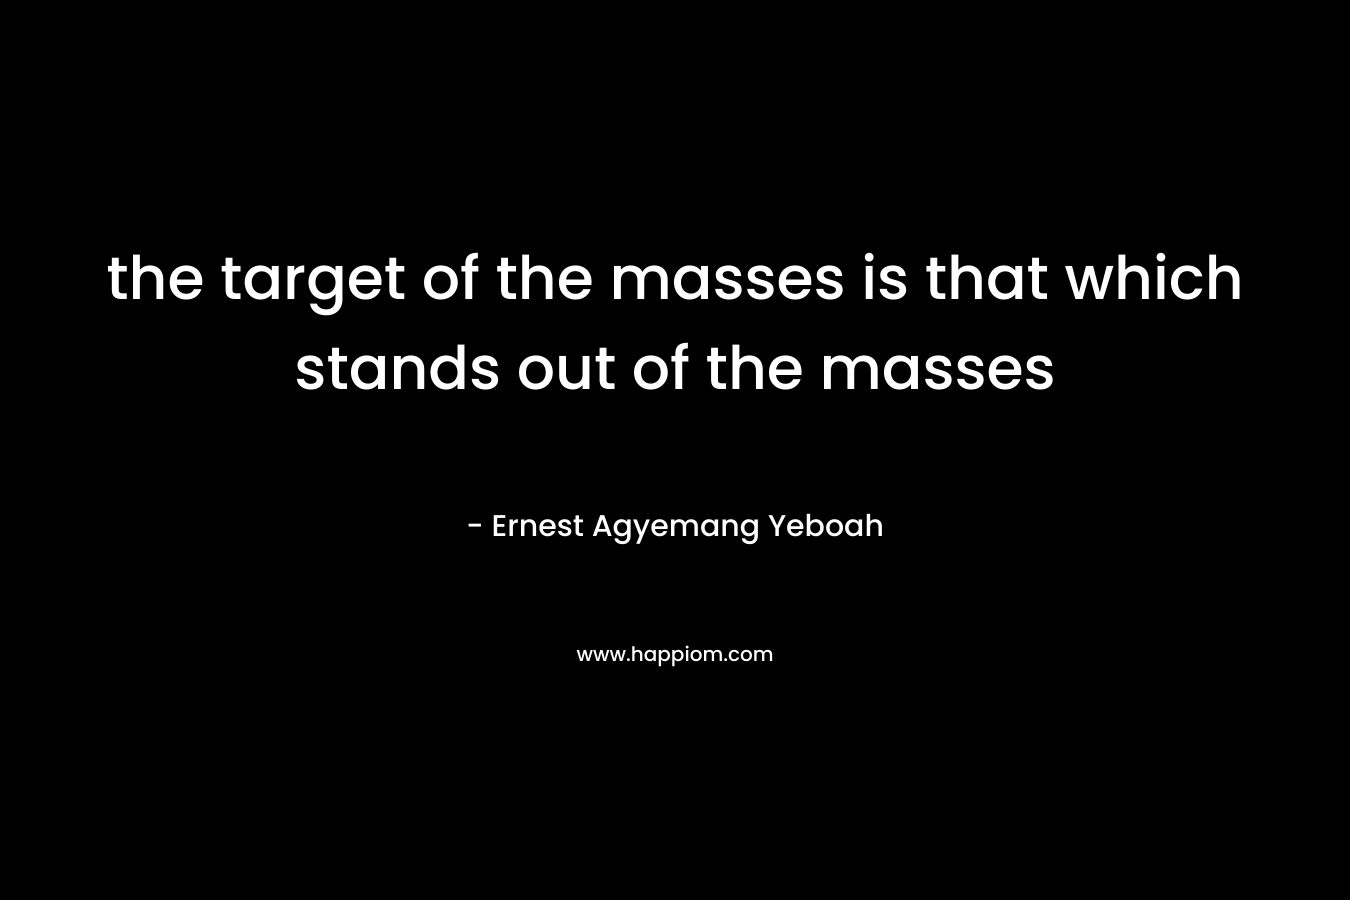 the target of the masses is that which stands out of the masses